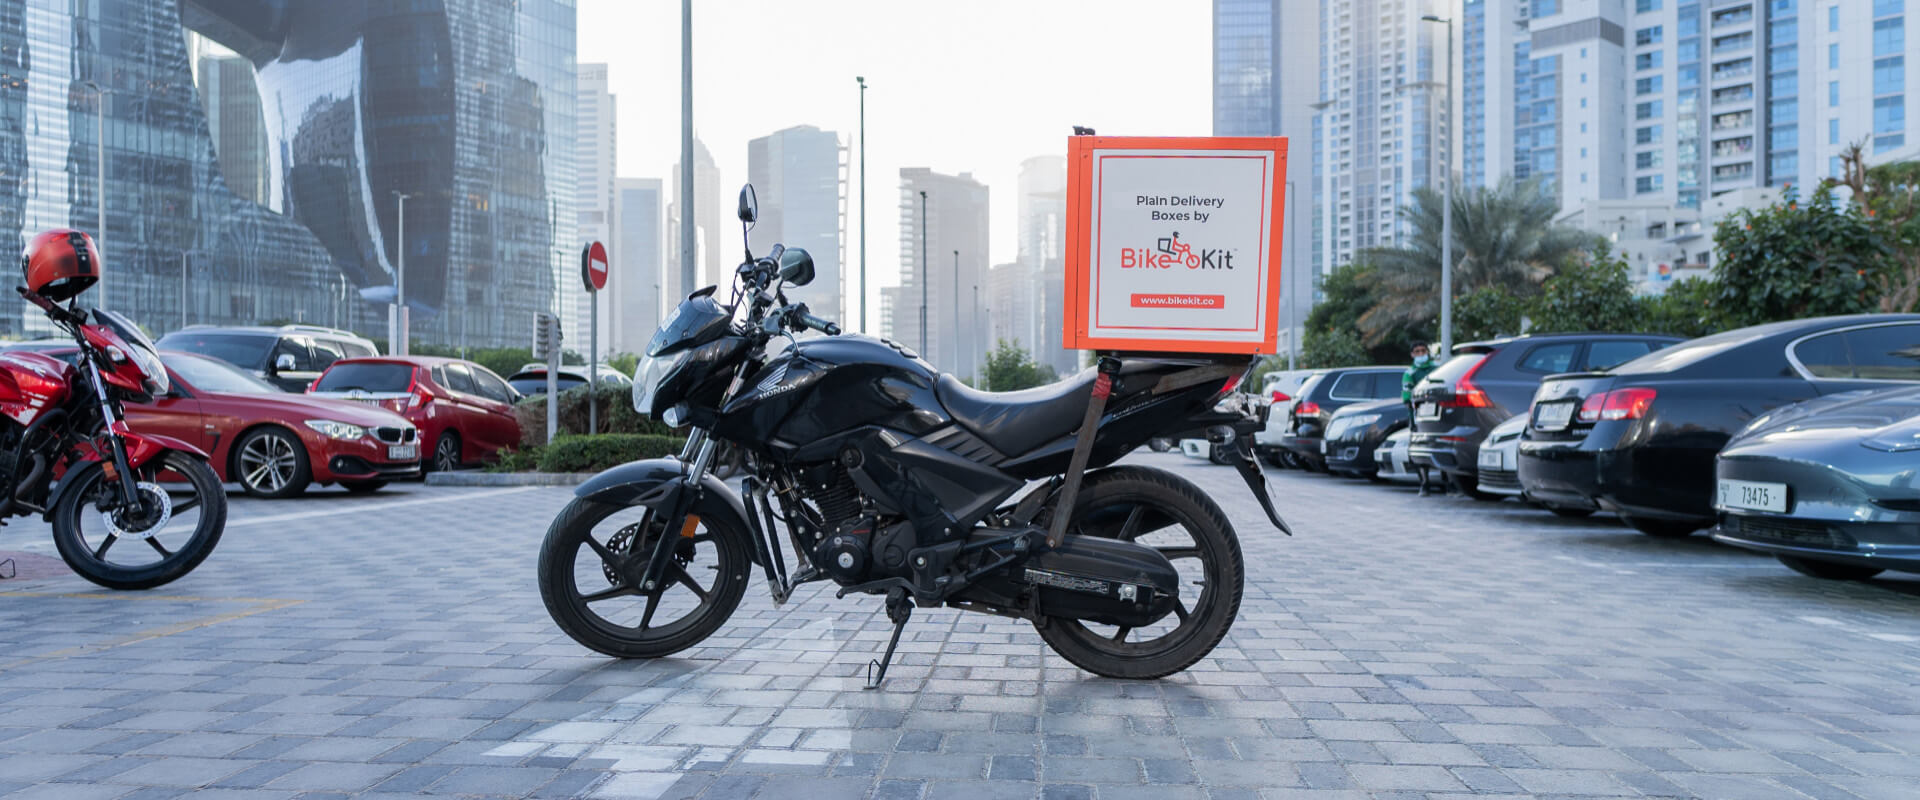 UAE food delivery box manufacturers